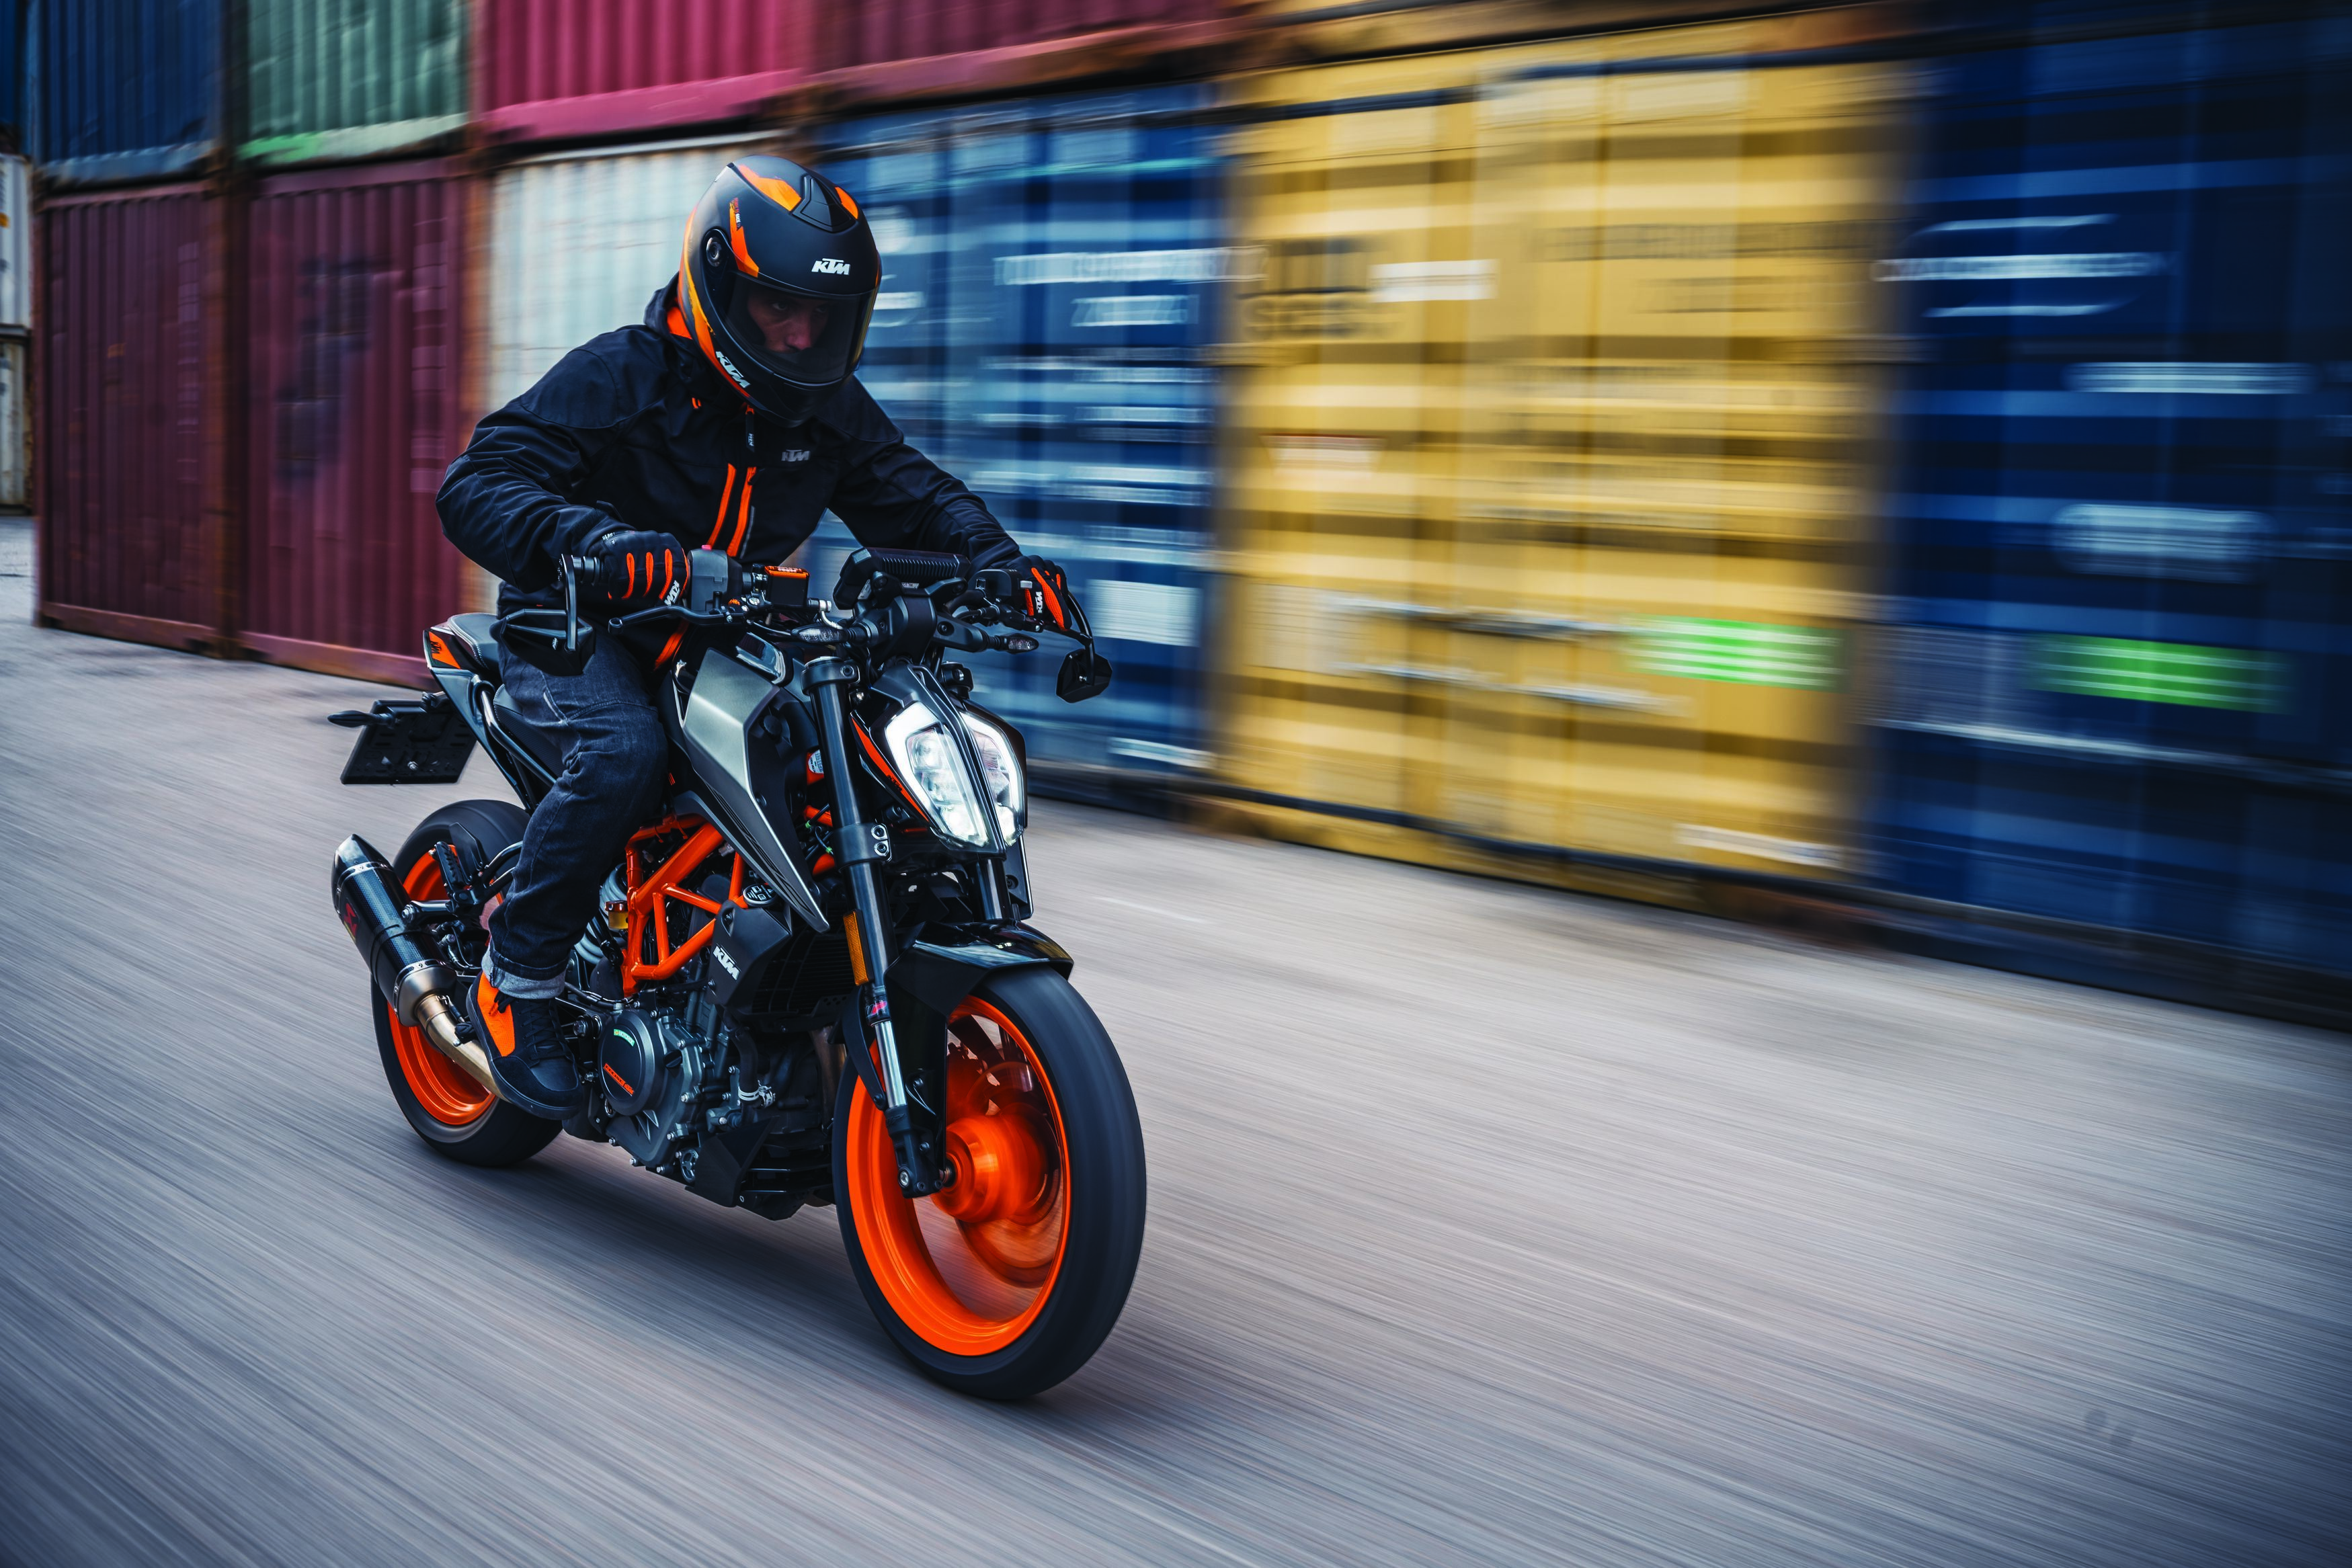 KTM LAUNCHES THE ALL NEW MY21 KTM 125 DUKE